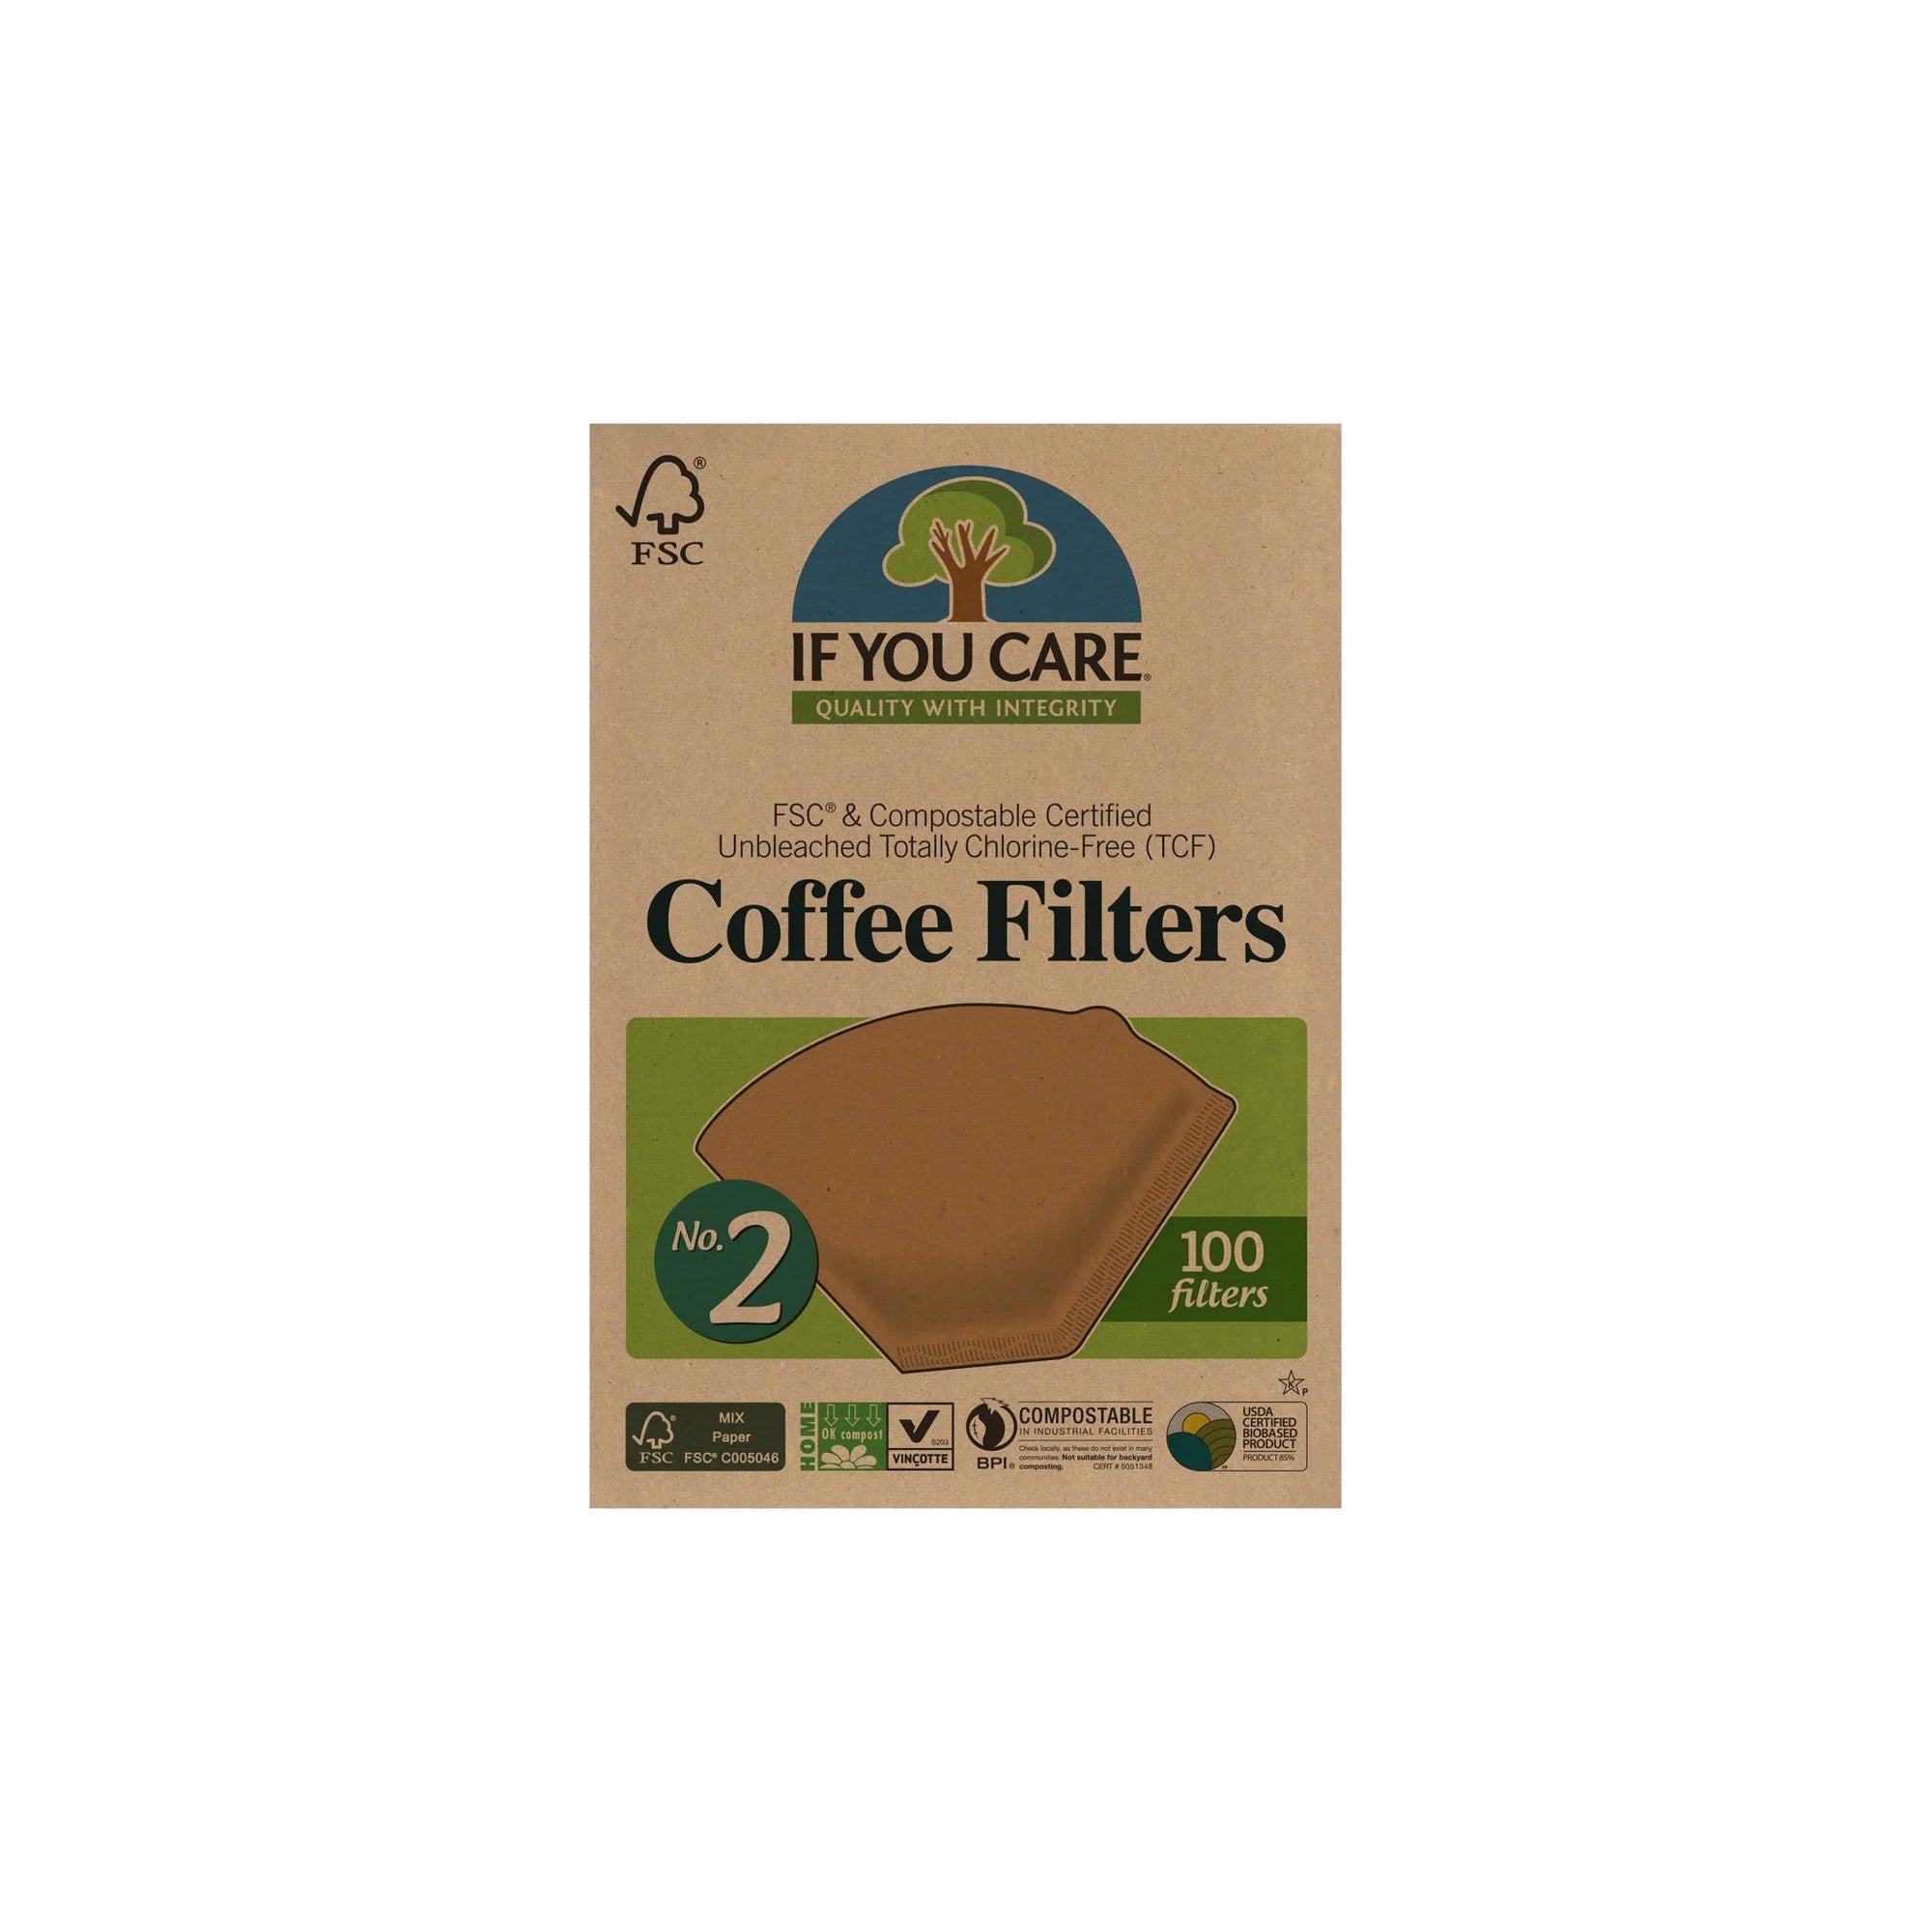 If You Care - Coffee Filters Large (No4) Unbleached